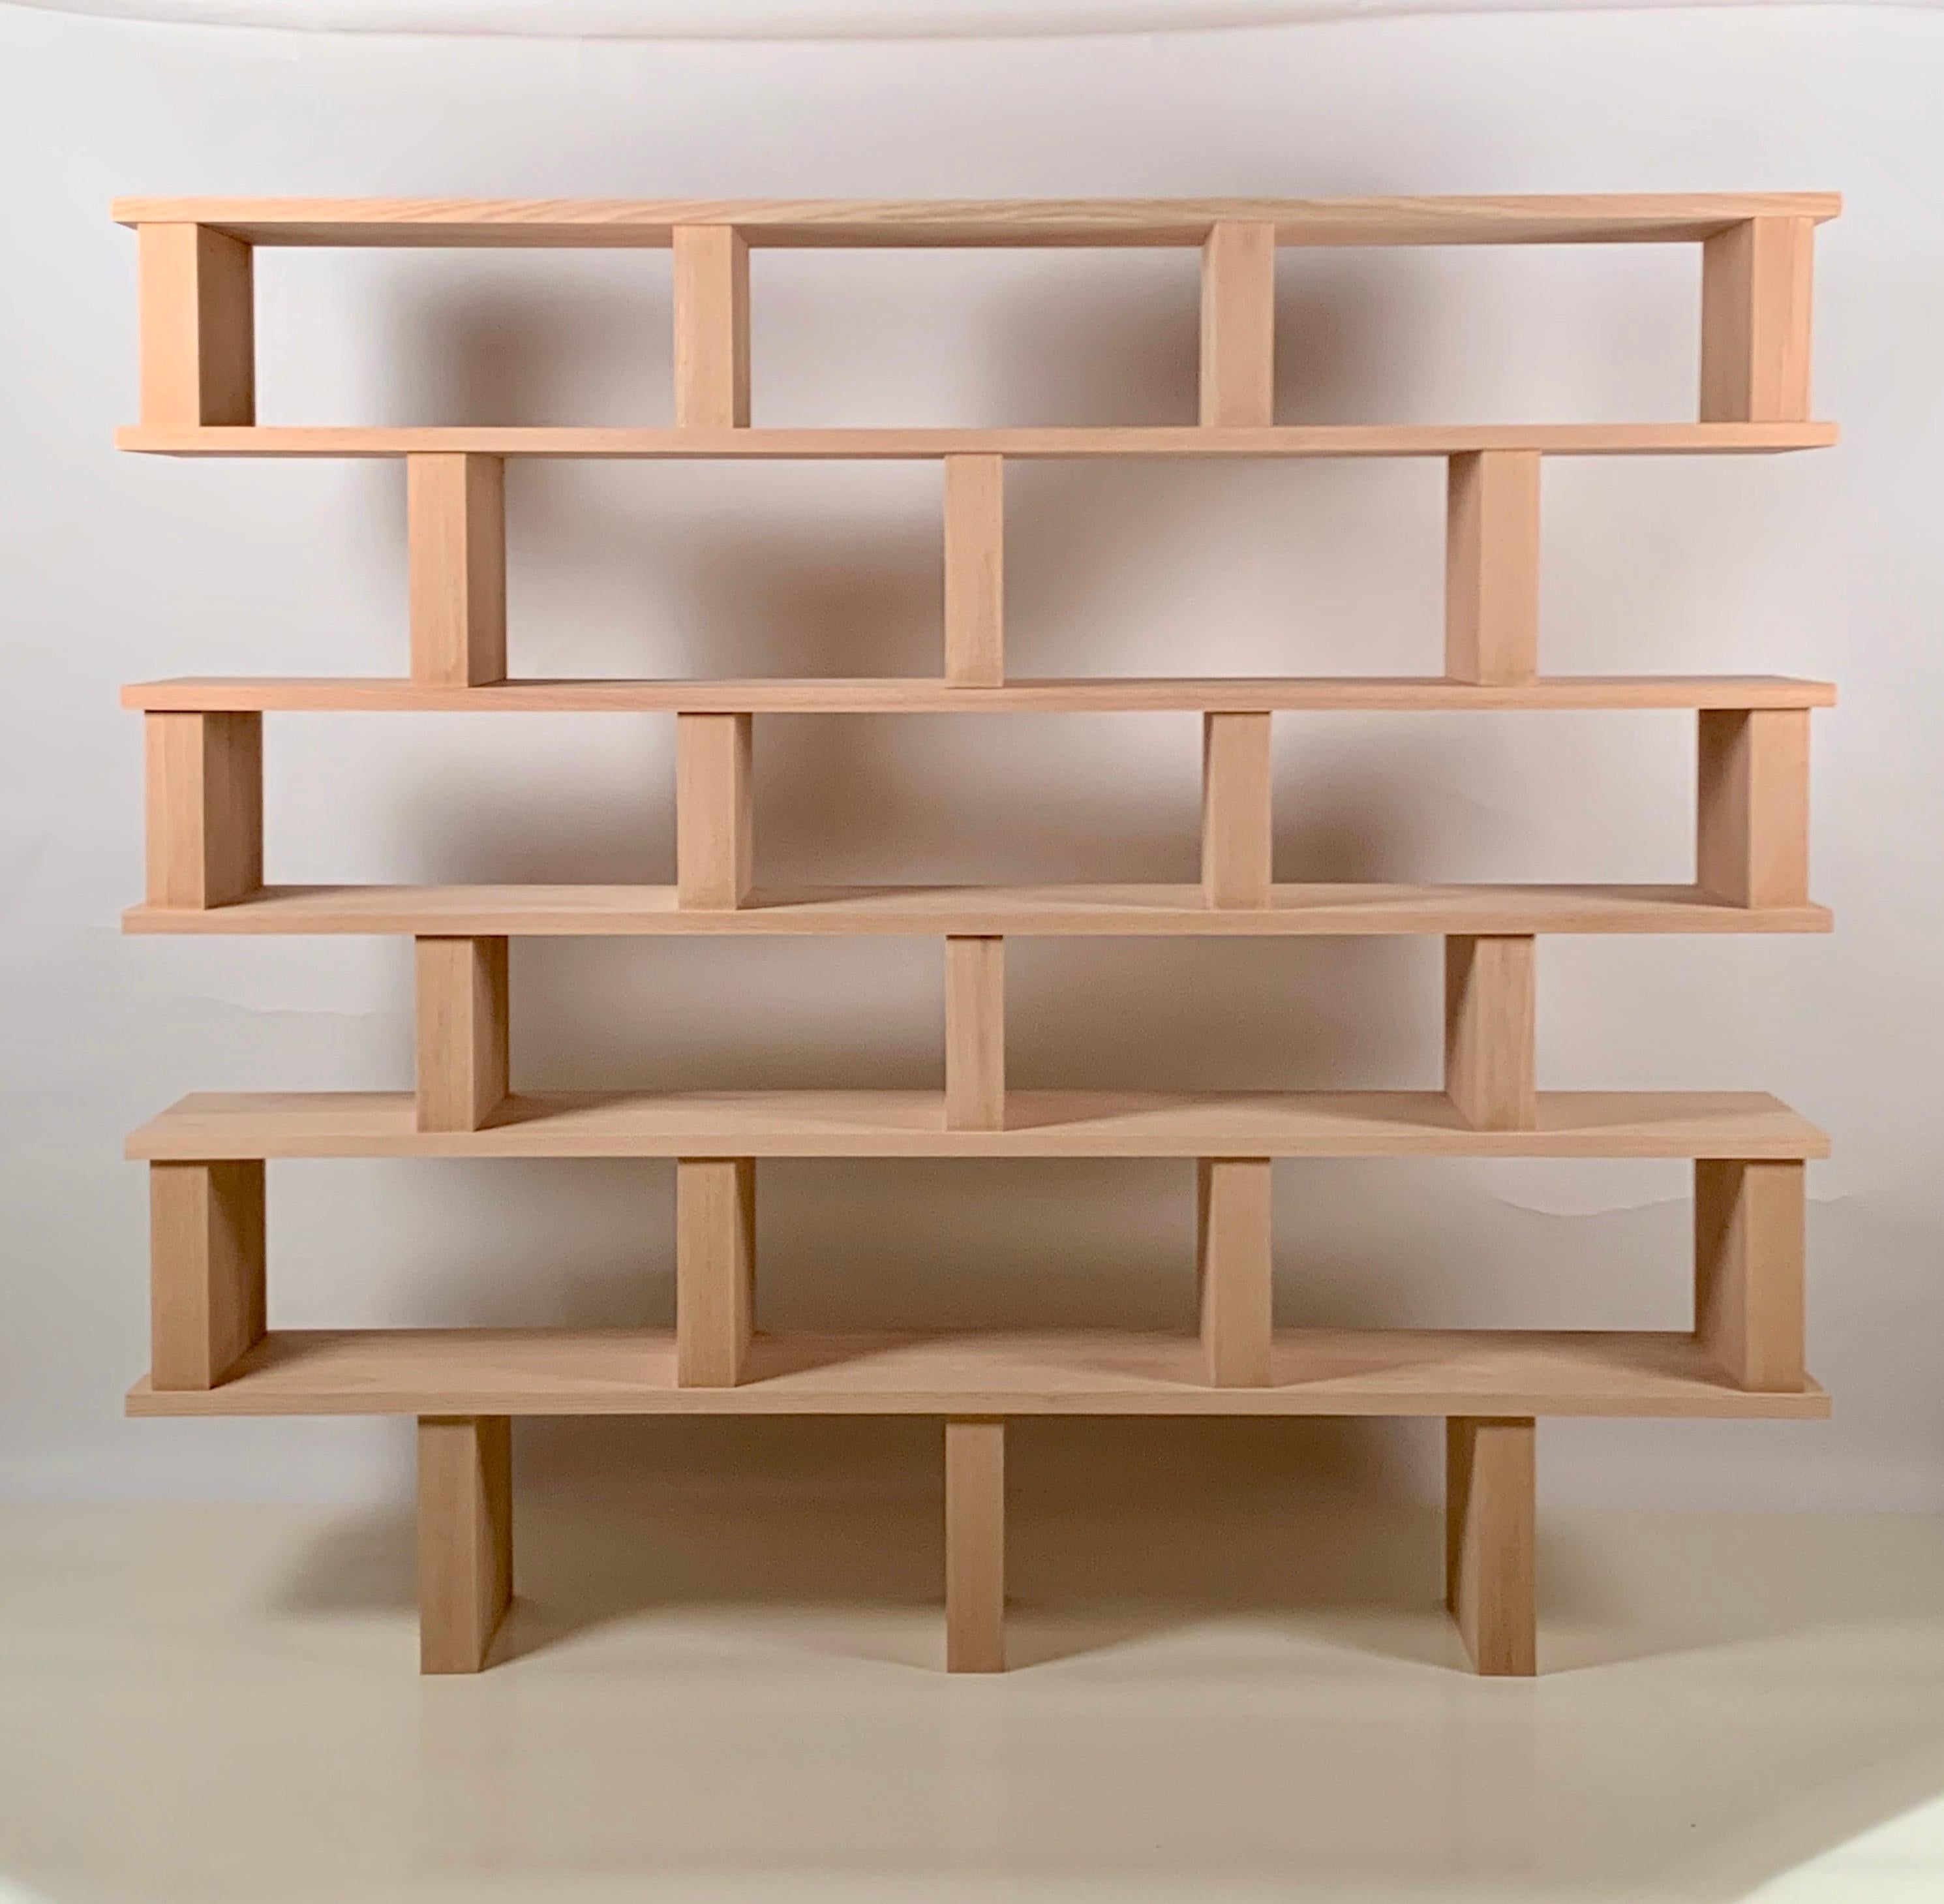 Six shelves 'Verticale' polished oak shelving unit.

Highest quality solid oak construction.

Comes in 3 parts connected with dowels, for easy shipping, installation and moving.